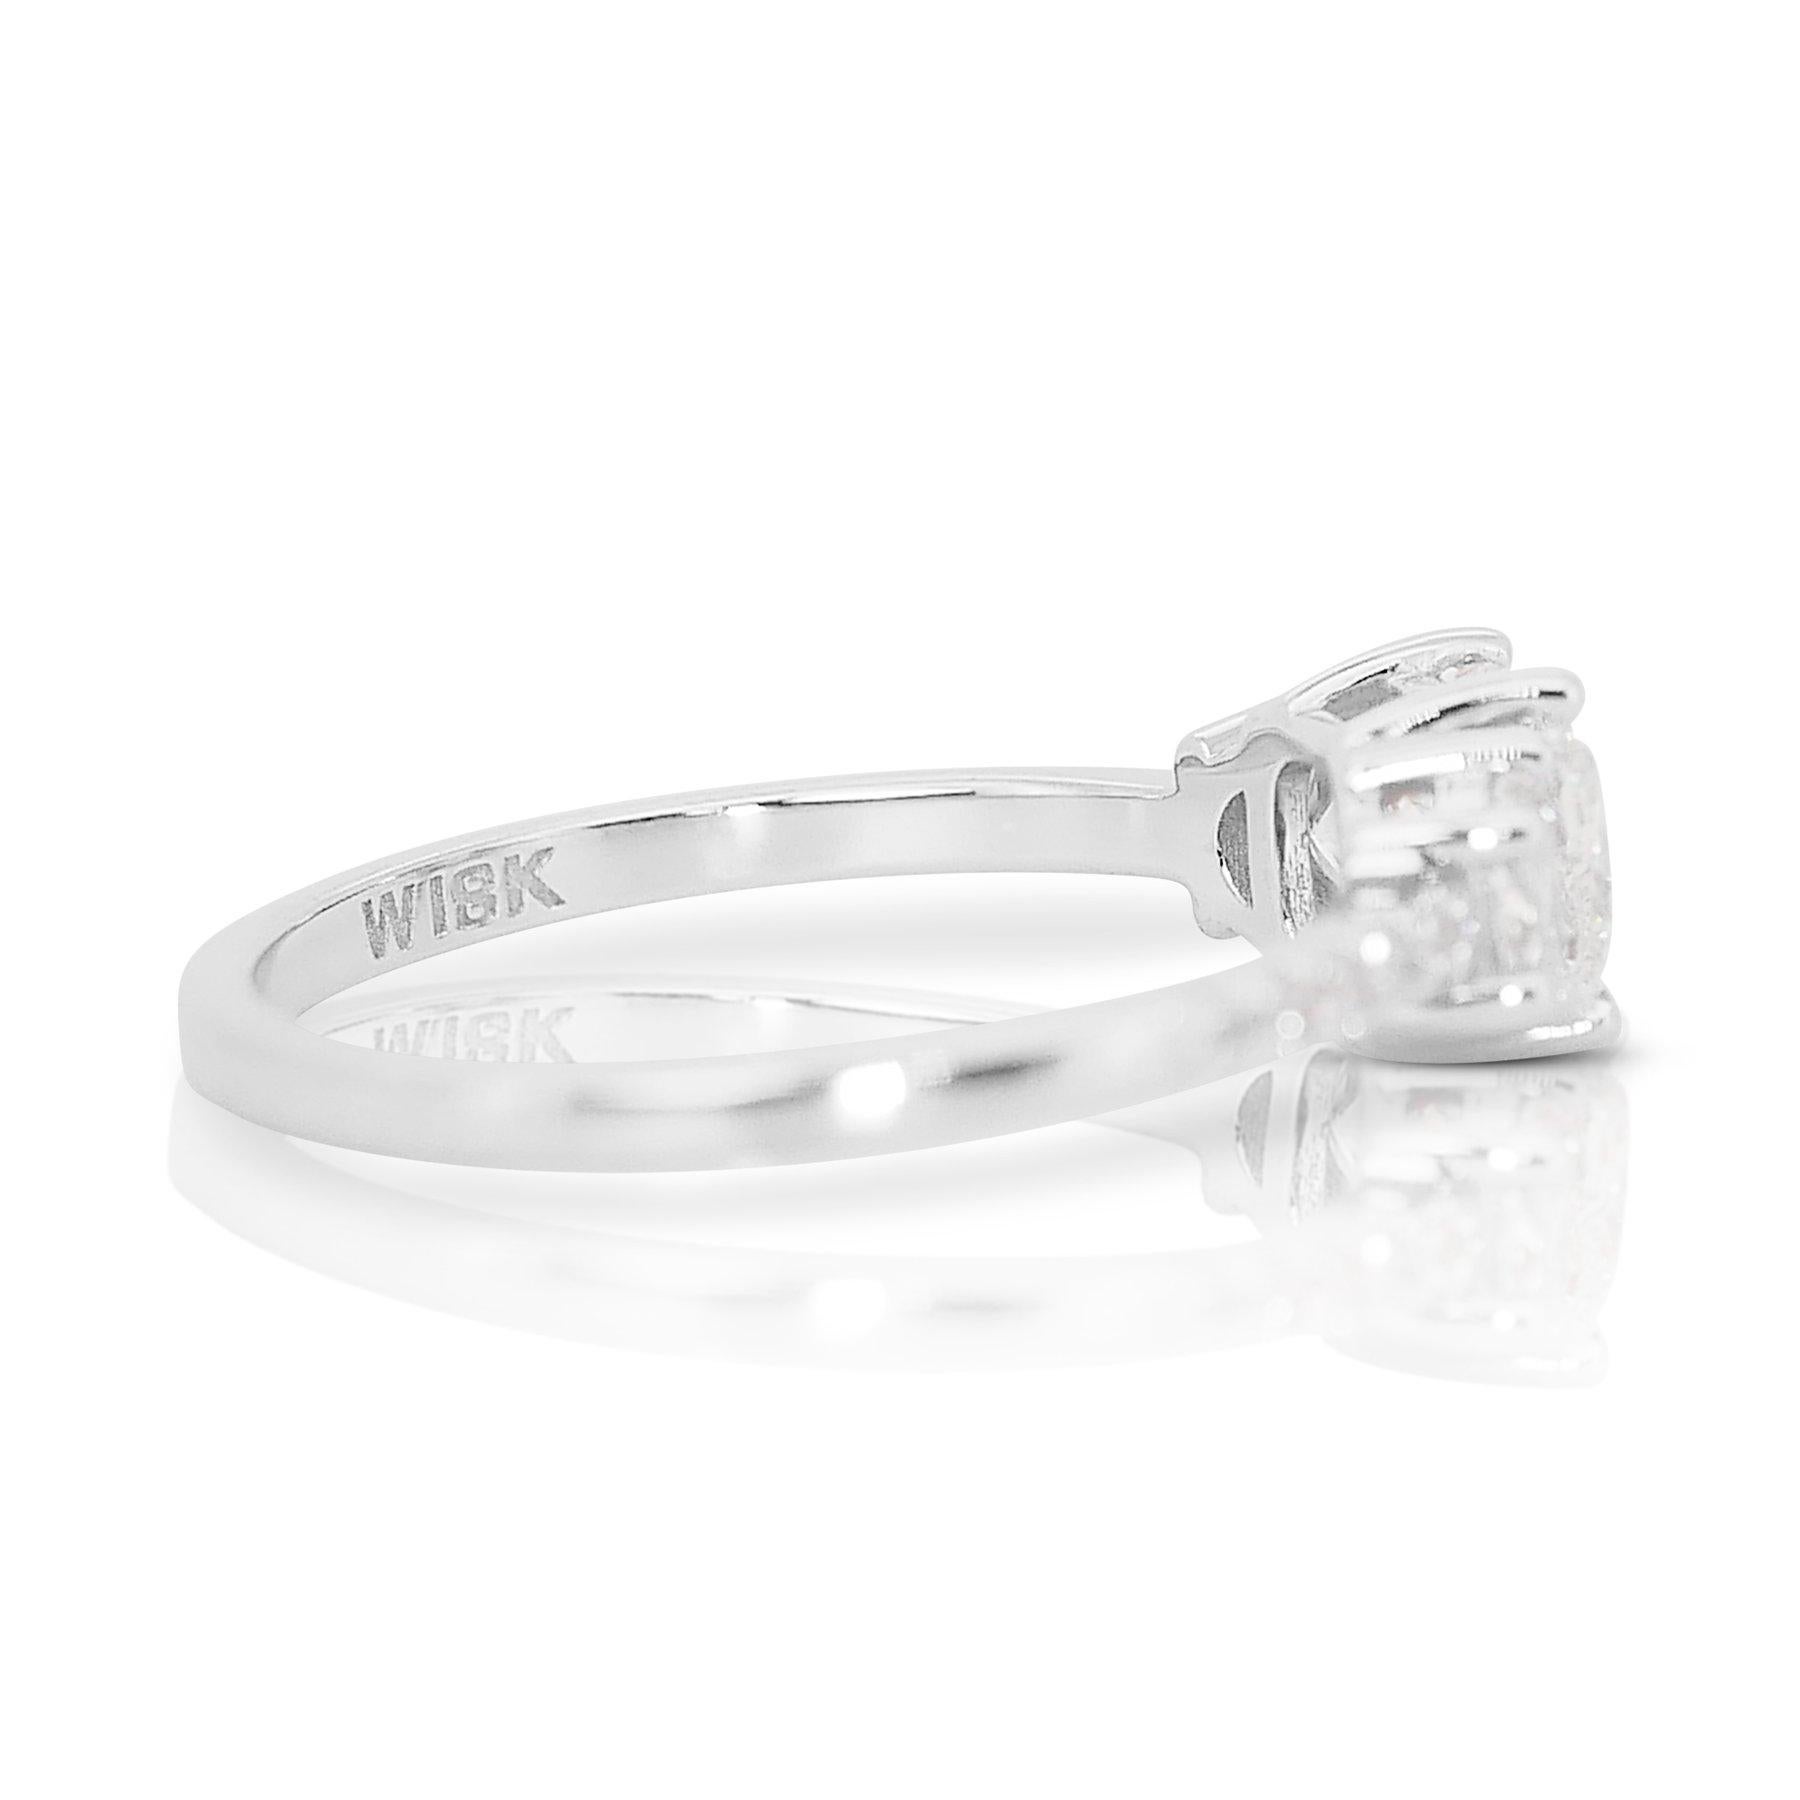 Luxurious 1.42ct Cushion Diamond Pave Ring in 18k White Gold - GIA Certified In New Condition For Sale In רמת גן, IL